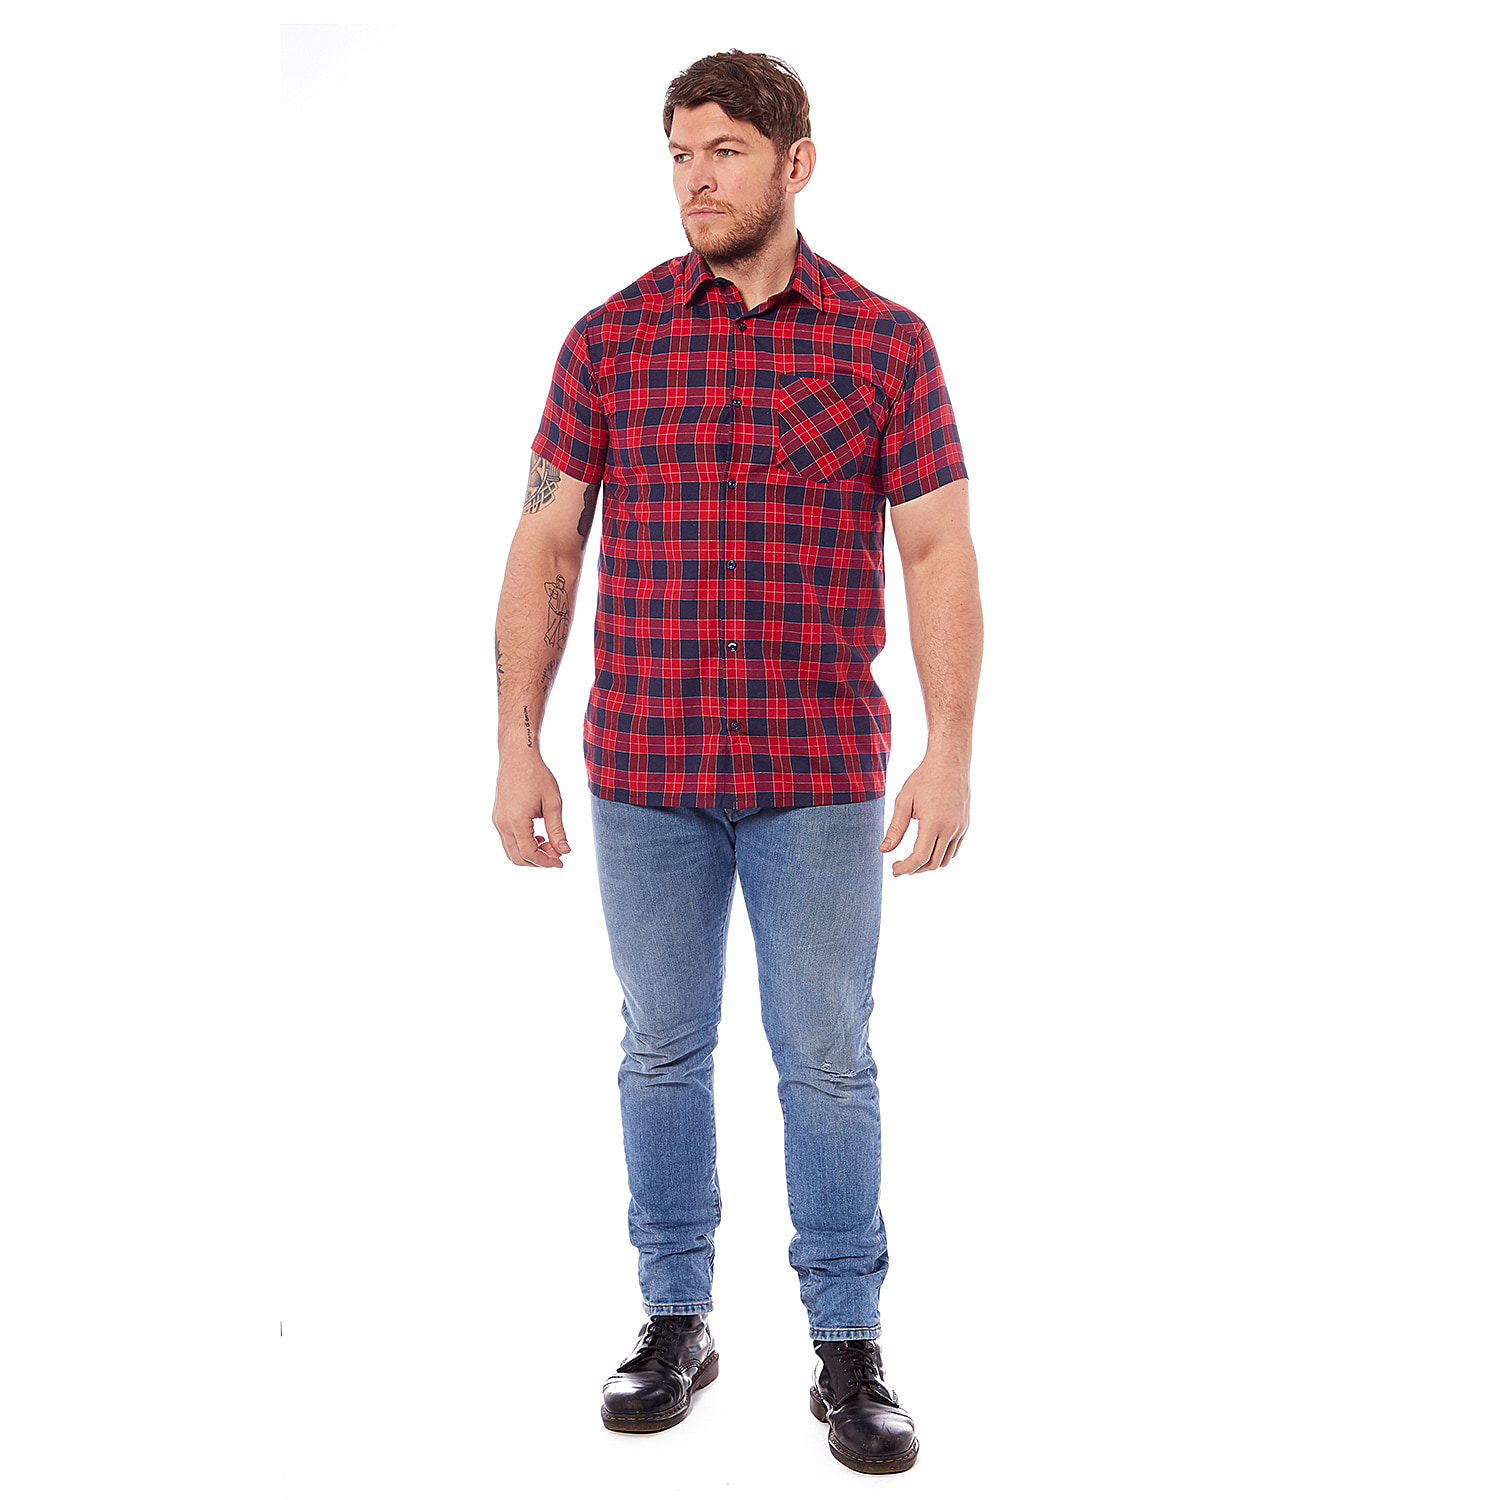 Arctic Storm Mens Check Shirt (Size M) - Red